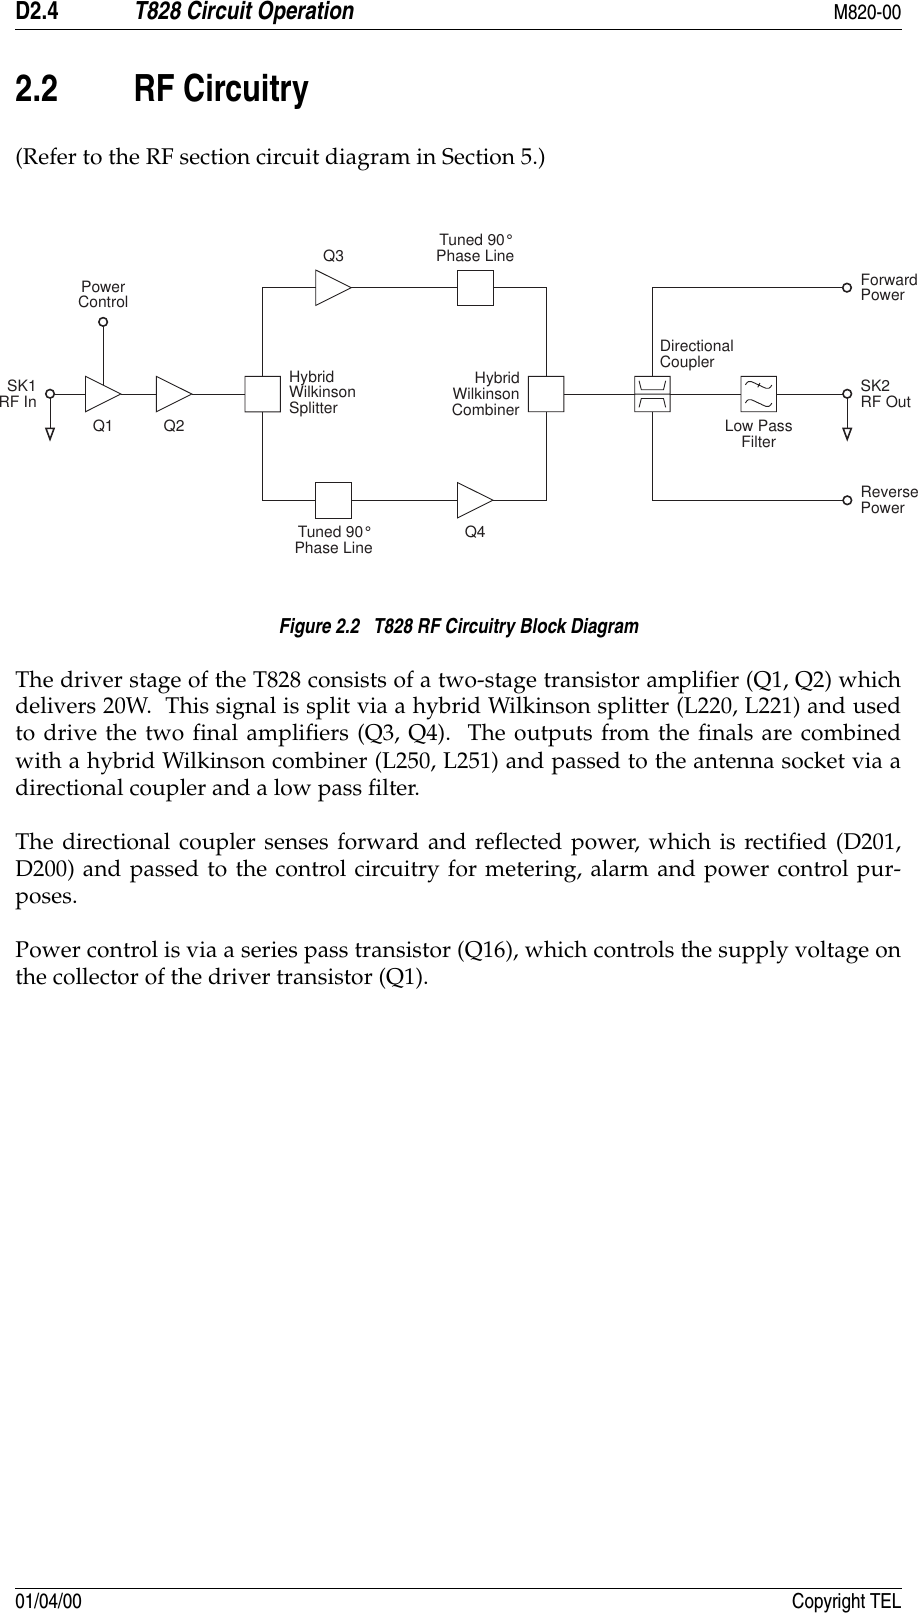 D2.4 T828 Circuit Operation M820-0001/04/00 Copyright TEL2.2 RF Circuitry(Refer to the RF section circuit diagram in Section 5.)Figure 2.2   T828 RF Circuitry Block DiagramThe driver stage of the T828 consists of a two-stage transistor amplifier (Q1, Q2) whichdelivers 20W.  This signal is split via a hybrid Wilkinson splitter (L220, L221) and usedto drive the two final amplifiers (Q3, Q4).  The outputs from the finals are combinedwith a hybrid Wilkinson combiner (L250, L251) and passed to the antenna socket via adirectional coupler and a low pass filter.The directional coupler senses forward and reflected power, which is rectified (D201,D200) and passed to the control circuitry for metering, alarm and power control pur-poses.Power control is via a series pass transistor (Q16), which controls the supply voltage onthe collector of the driver transistor (Q1). HybridWilkinsonSplitterTuned 90°Phase LineTuned 90°Phase LineHybridWilkinsonCombinerSK1RF InQ1 Q2DirectionalCouplerLow PassFilterSK2RF OutPowerControlQ4Q3ReversePowerForwardPower